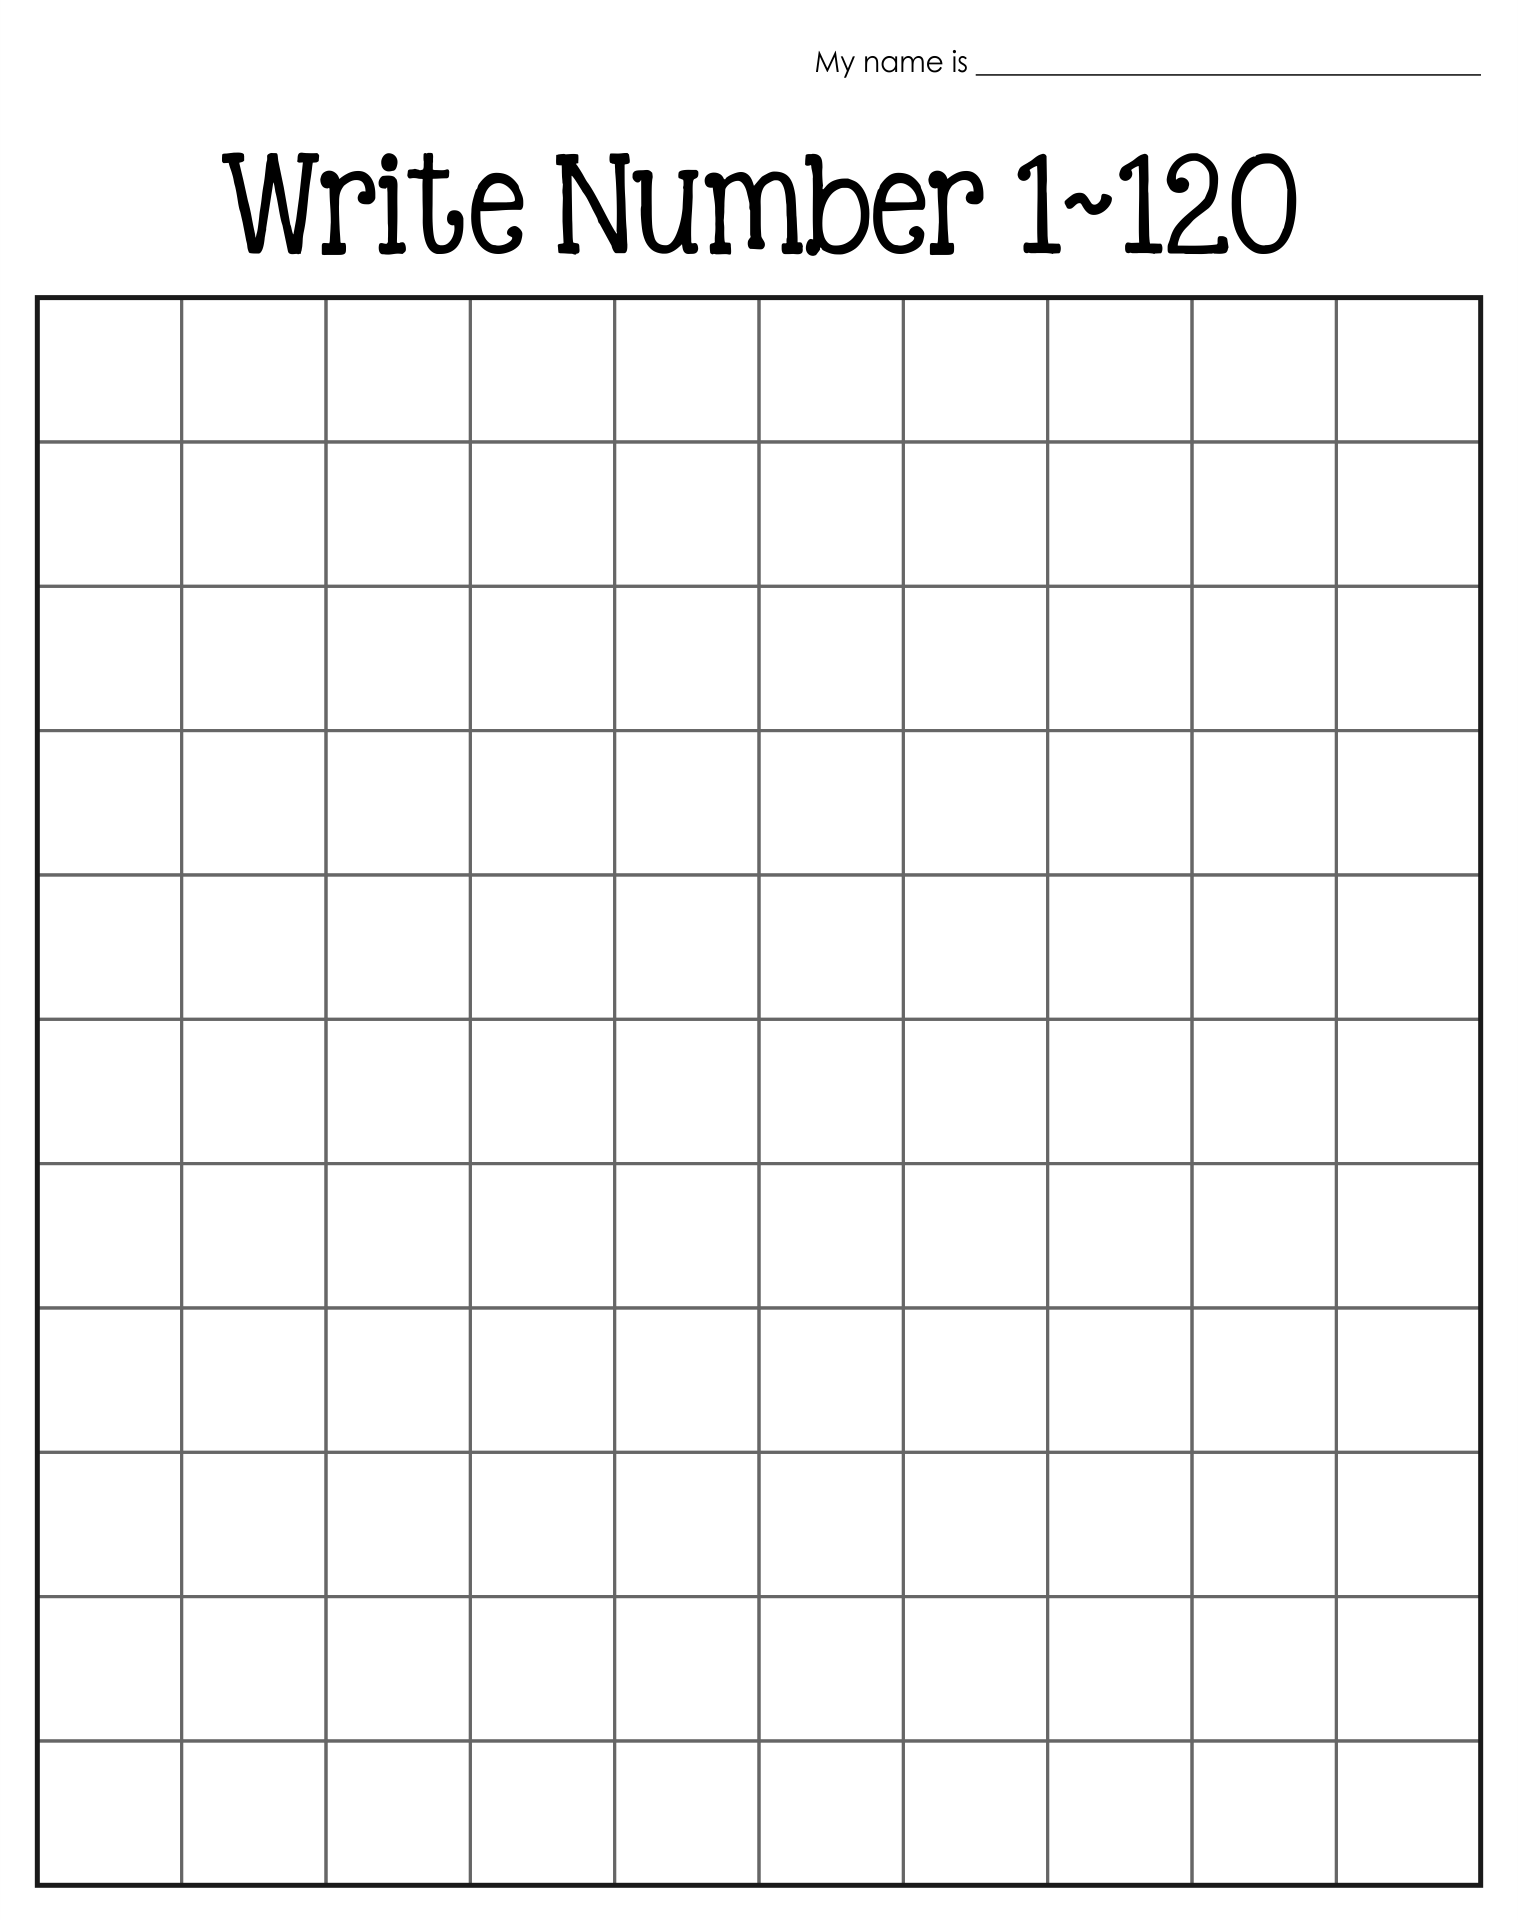 writing numbers resource